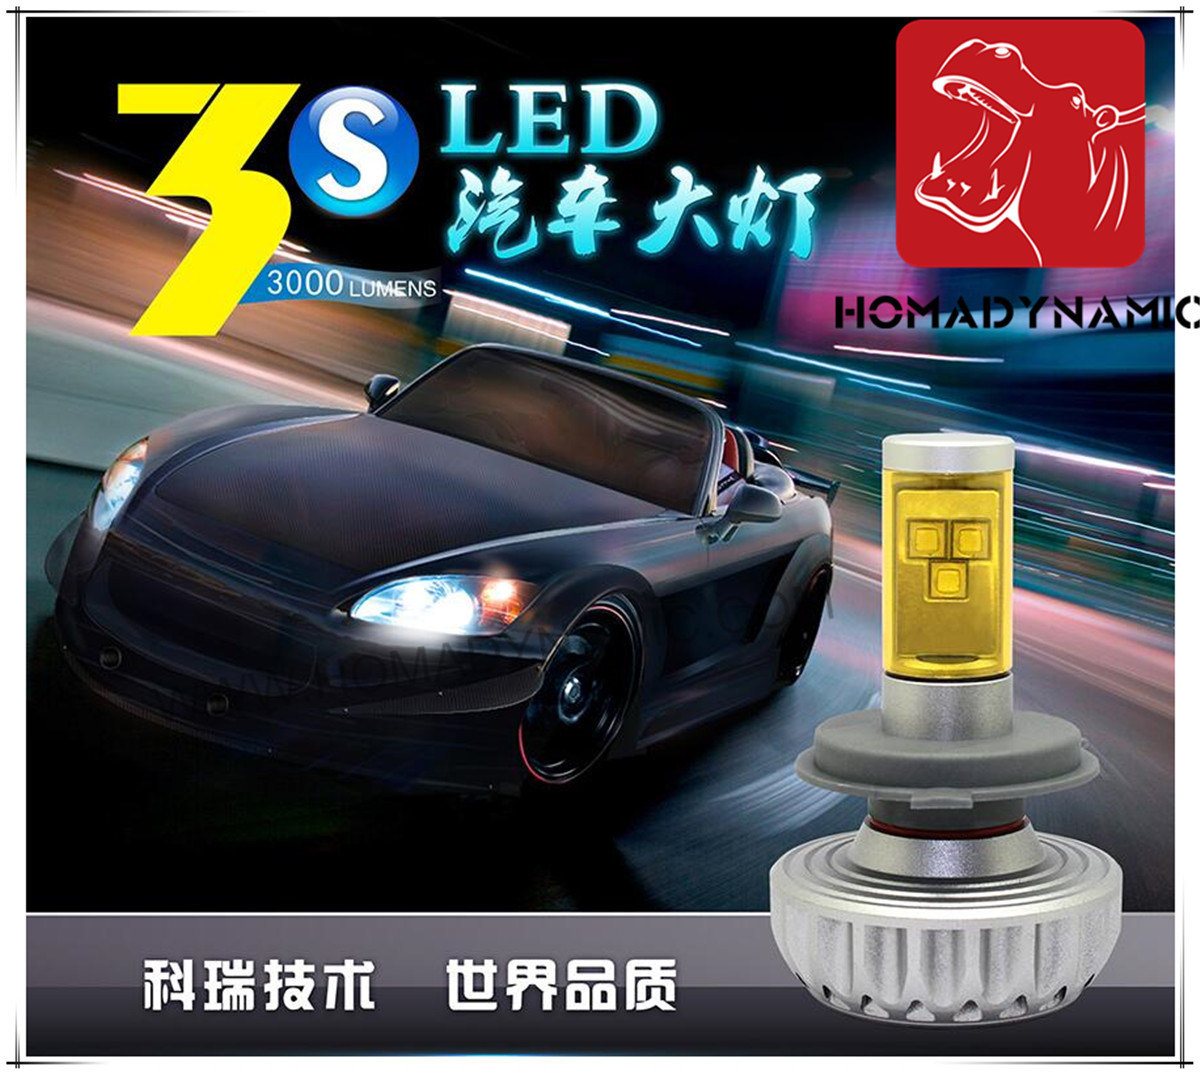 CREE Chip LED Headlight G3 LED Bulbs, with CE Certificate